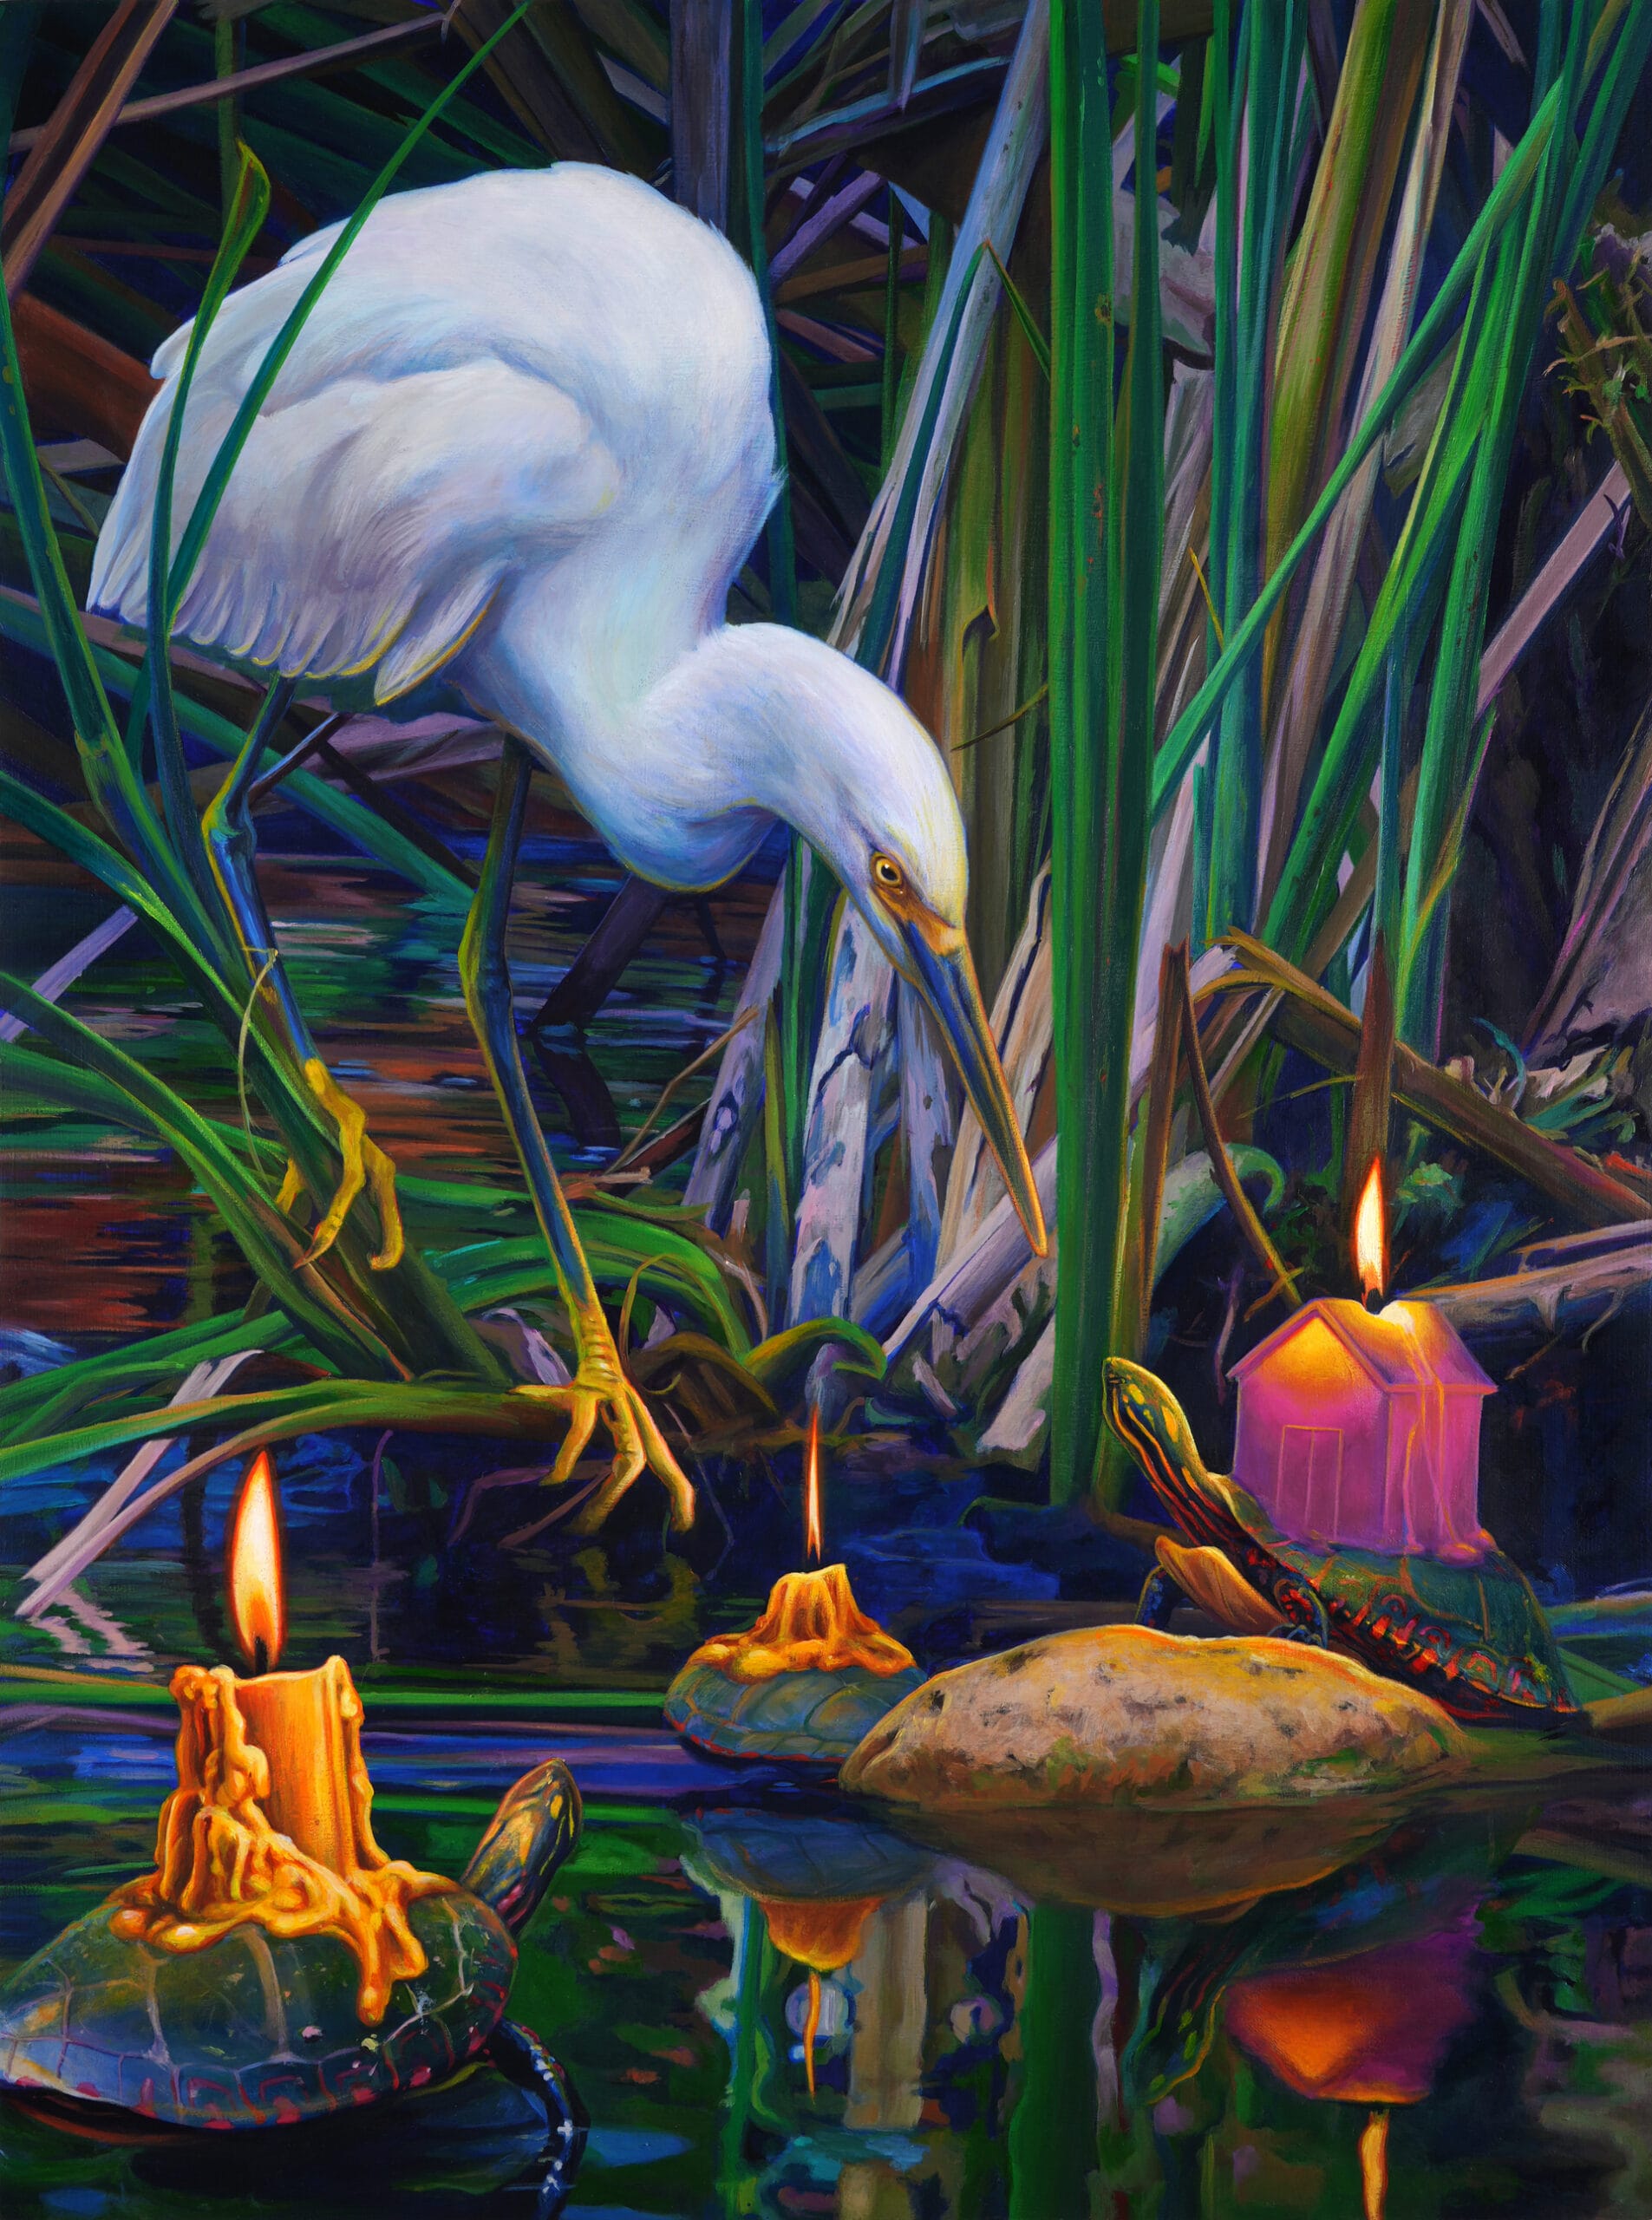 an egret at the shoreline among some reeds, glowing in the light of some candles on rocks, one of which is shaped like a house